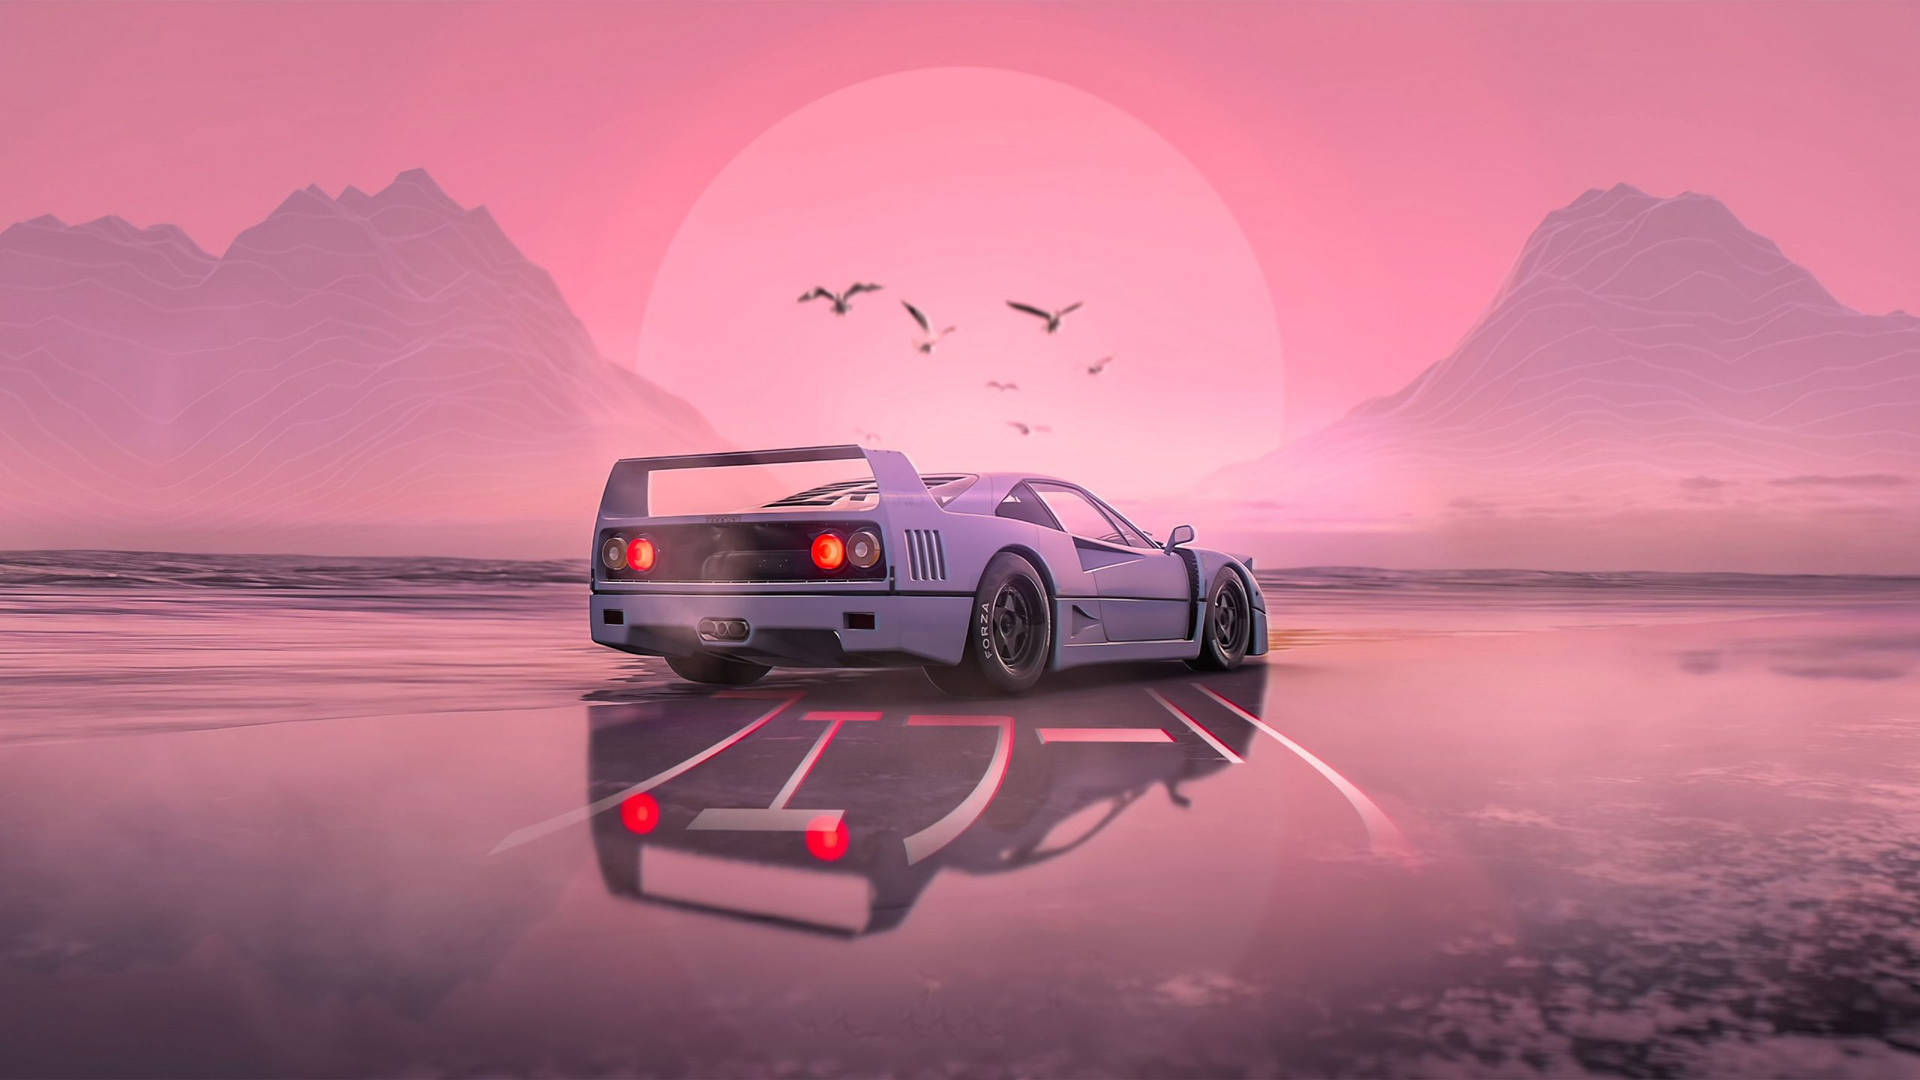 Anime Car 2560X1440 Wallpaper and Background Image